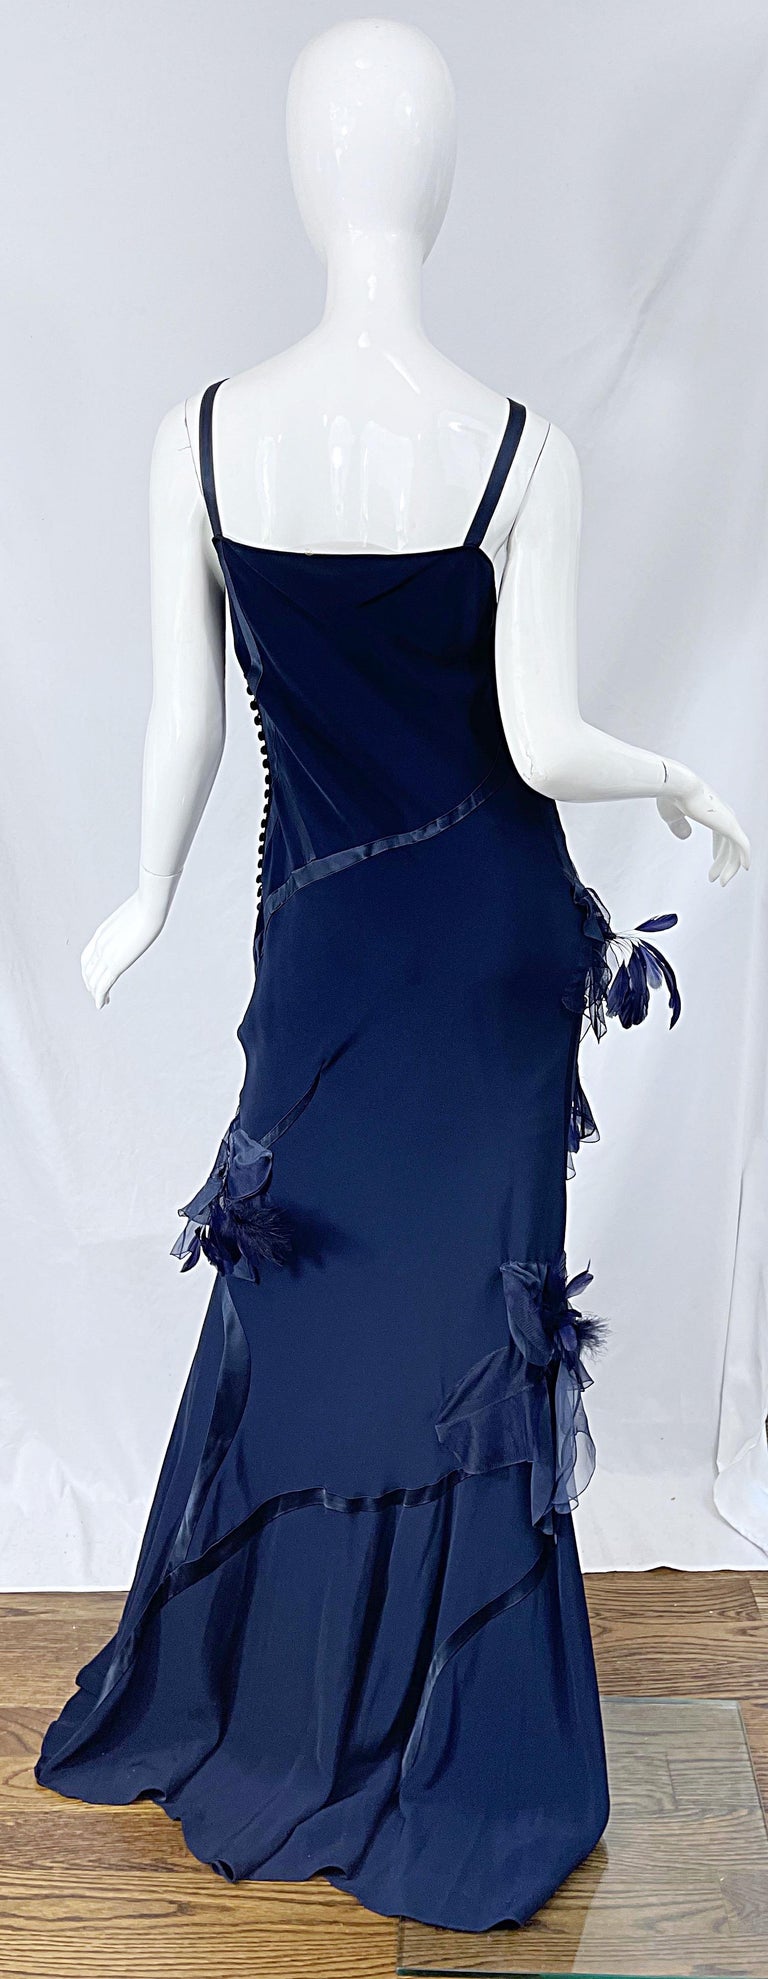 NWT John Galliano Size 10 Early 2000s Navy Blue Feather Silk / Satin Gown Dress For Sale 11